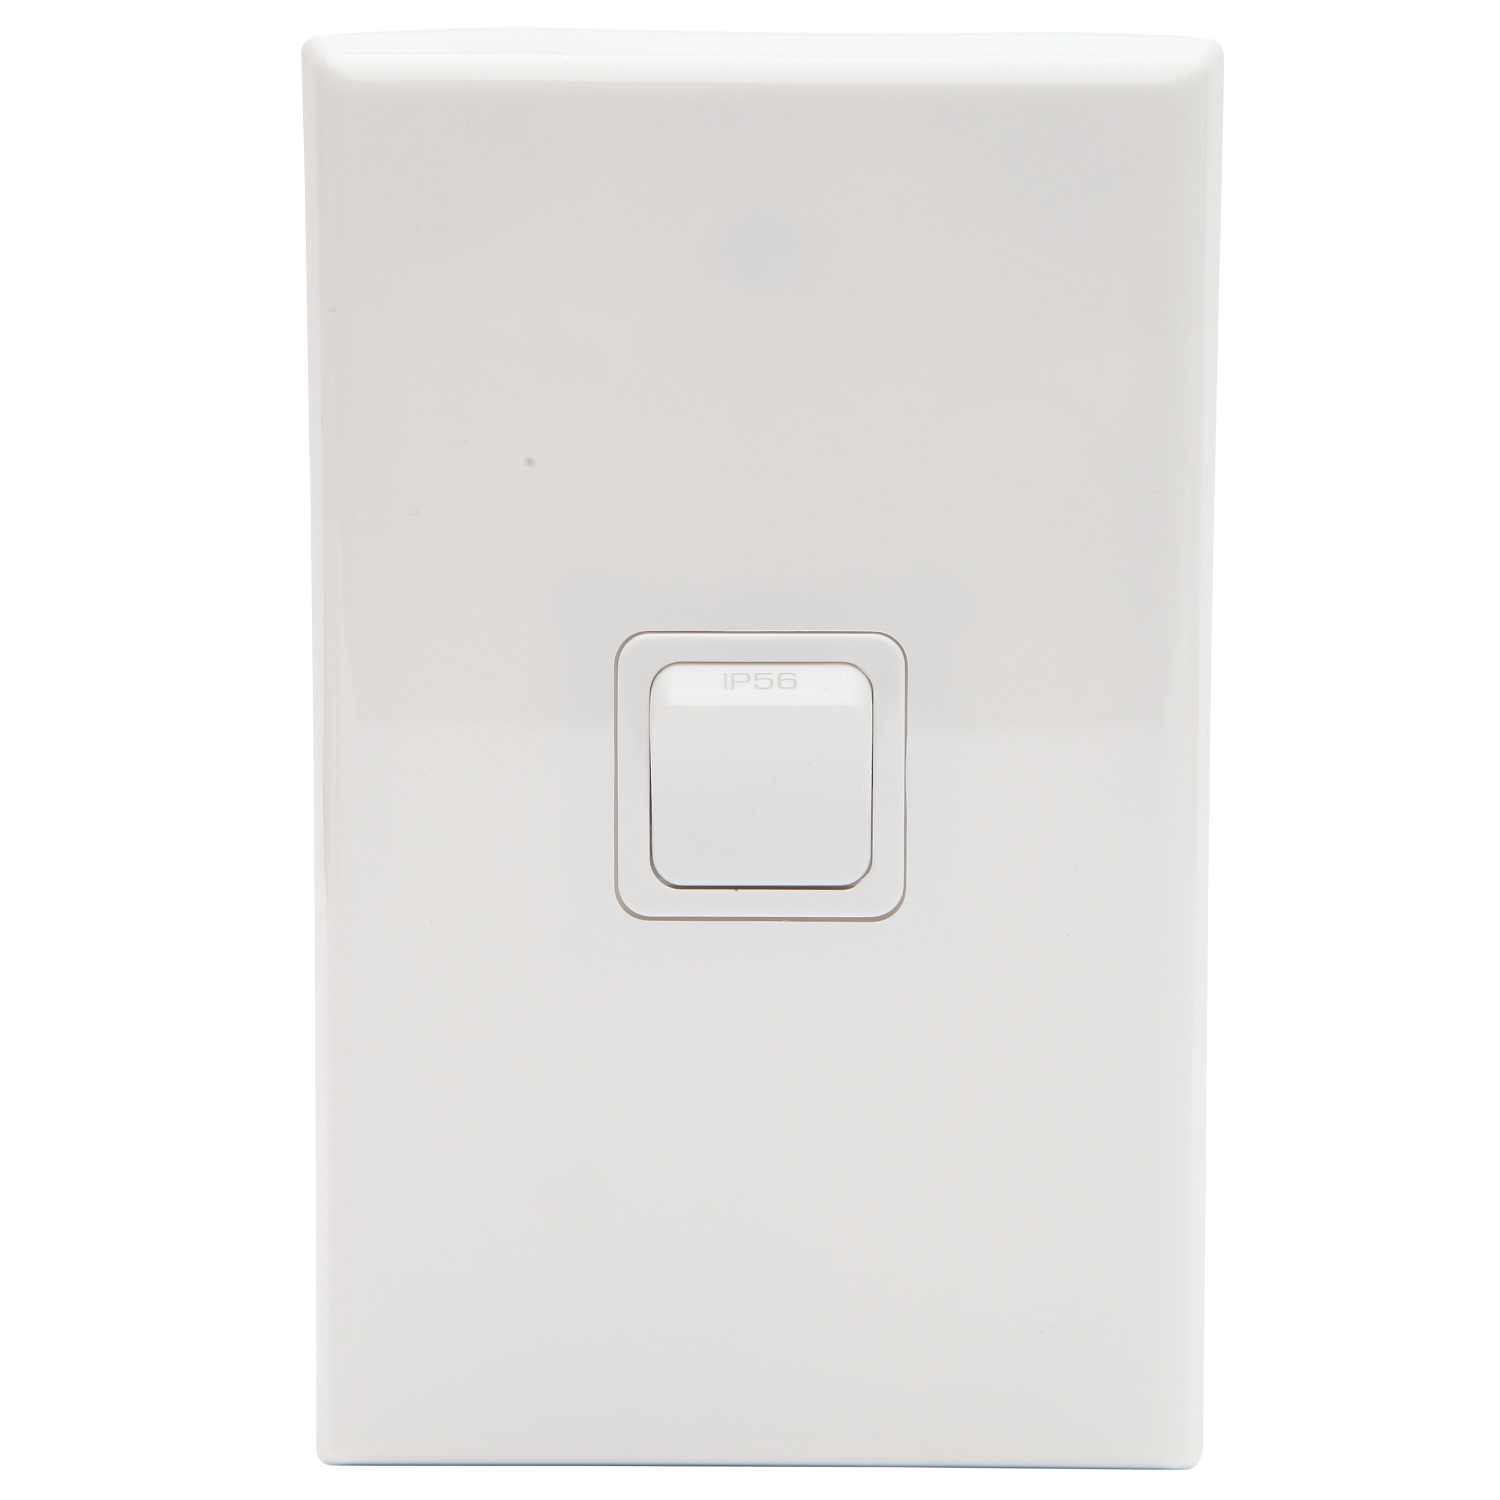 PDL 600 Series - Waterproof Switch 16A 1-Gang IP56 - White